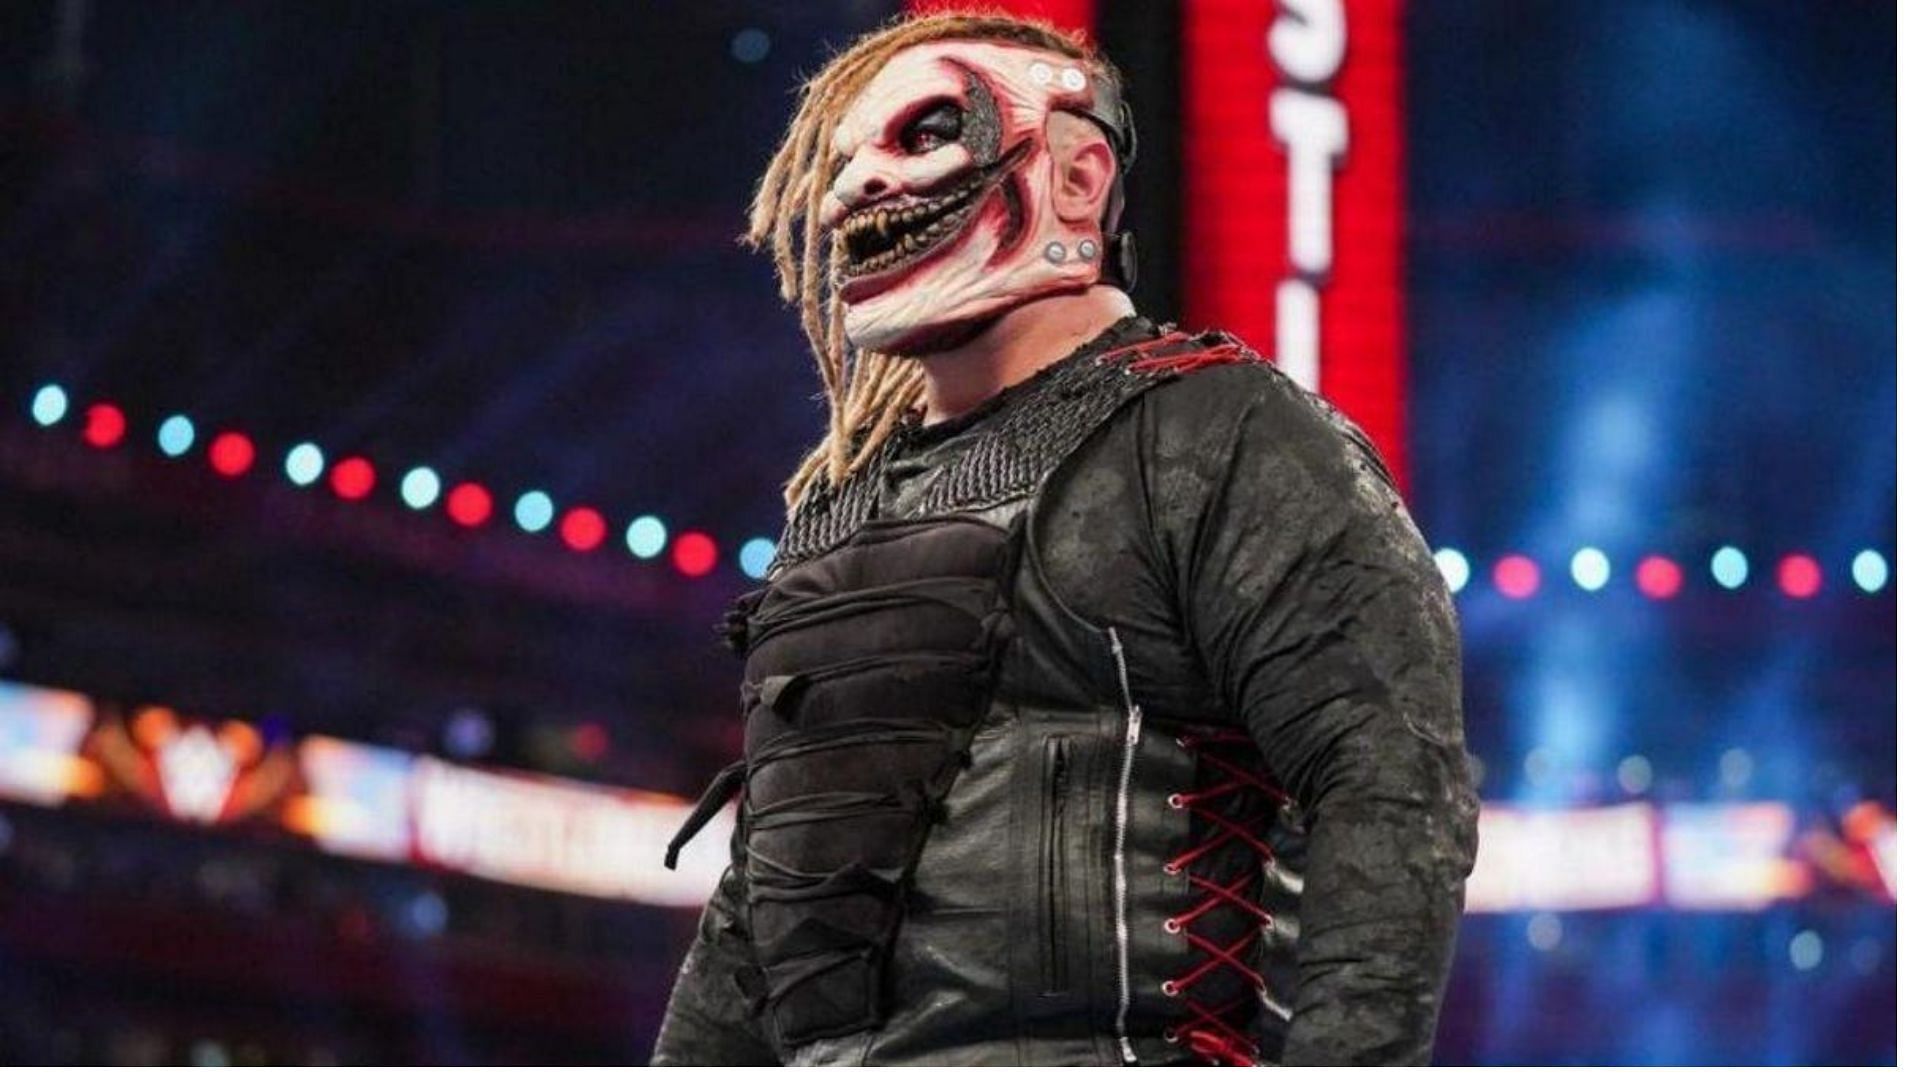 The Fiend was last seen at WrestleMania 37